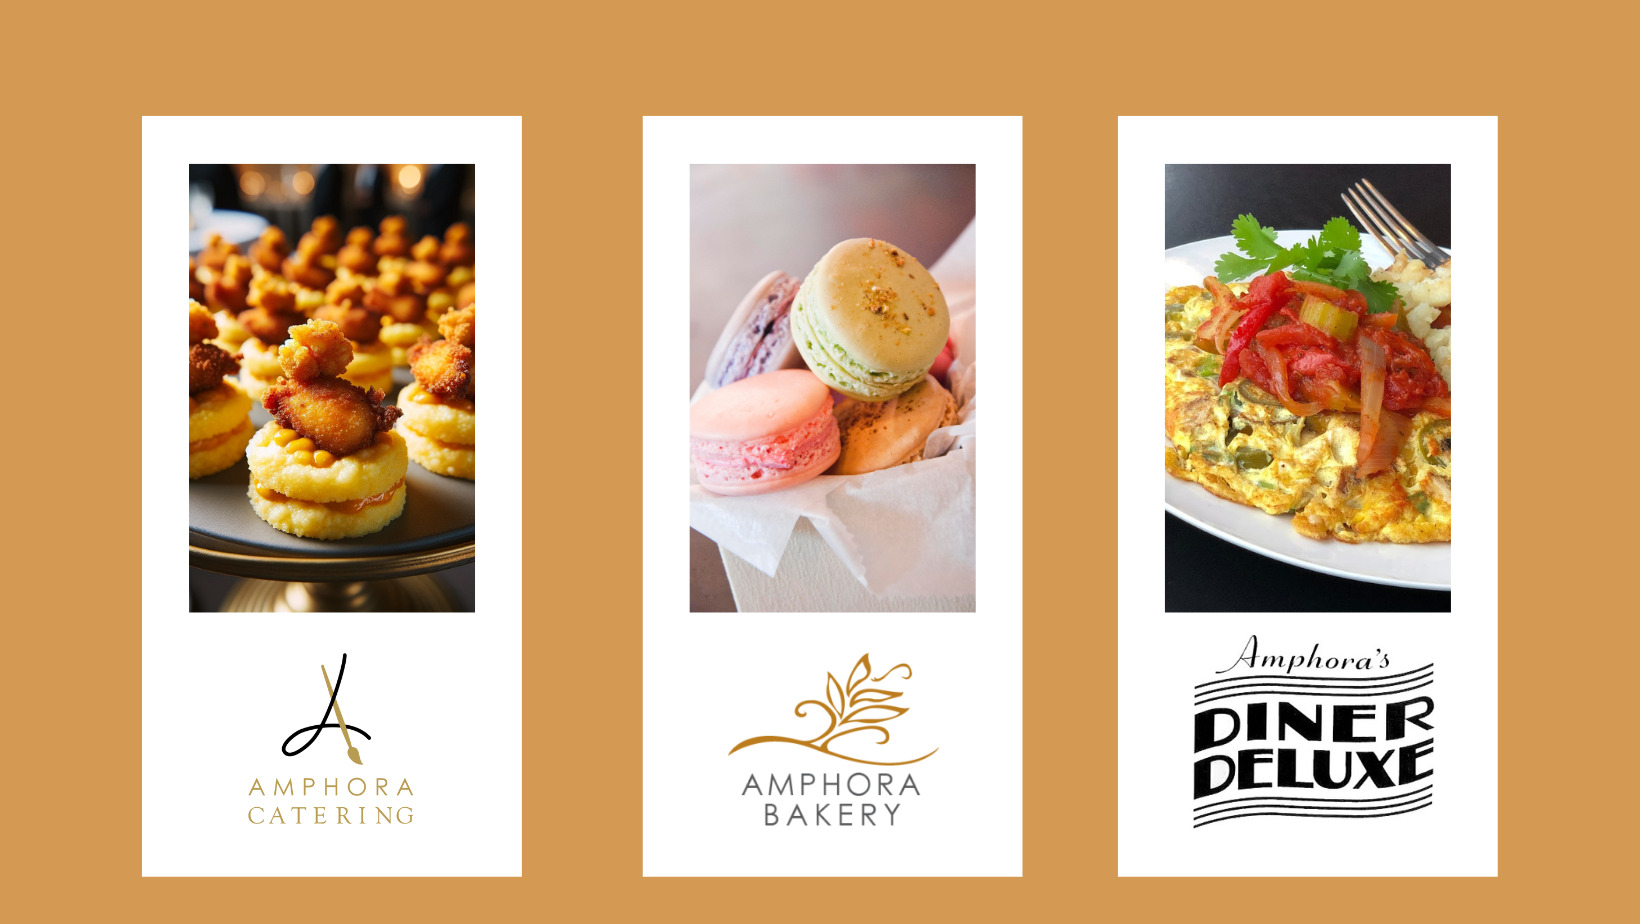 Amphora Catering, Amphora Bakery, and Amphora's Diner Deluxe logos with images